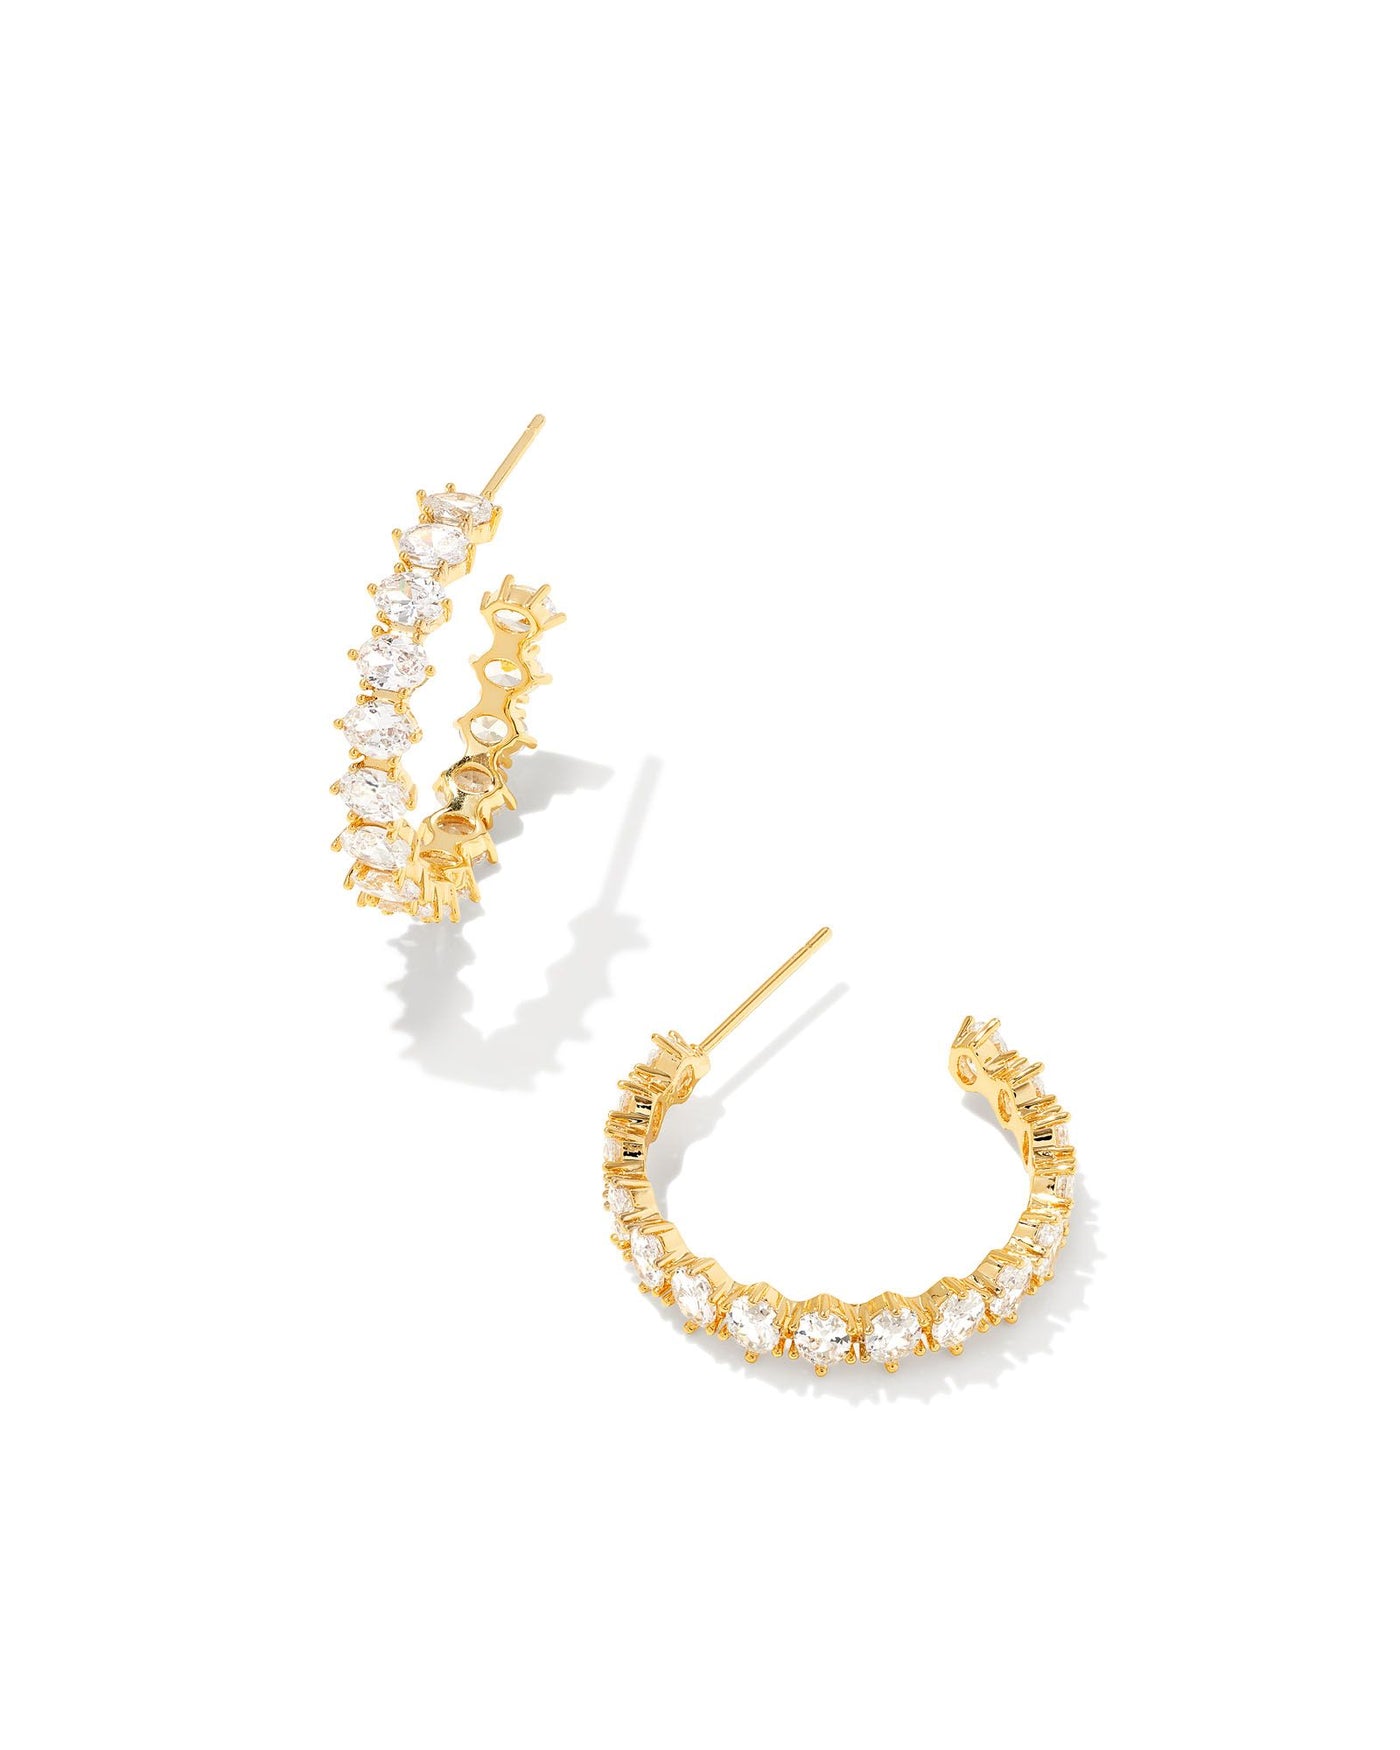 Cailin Crystal Hoop Earrings Gold on white background, front view.